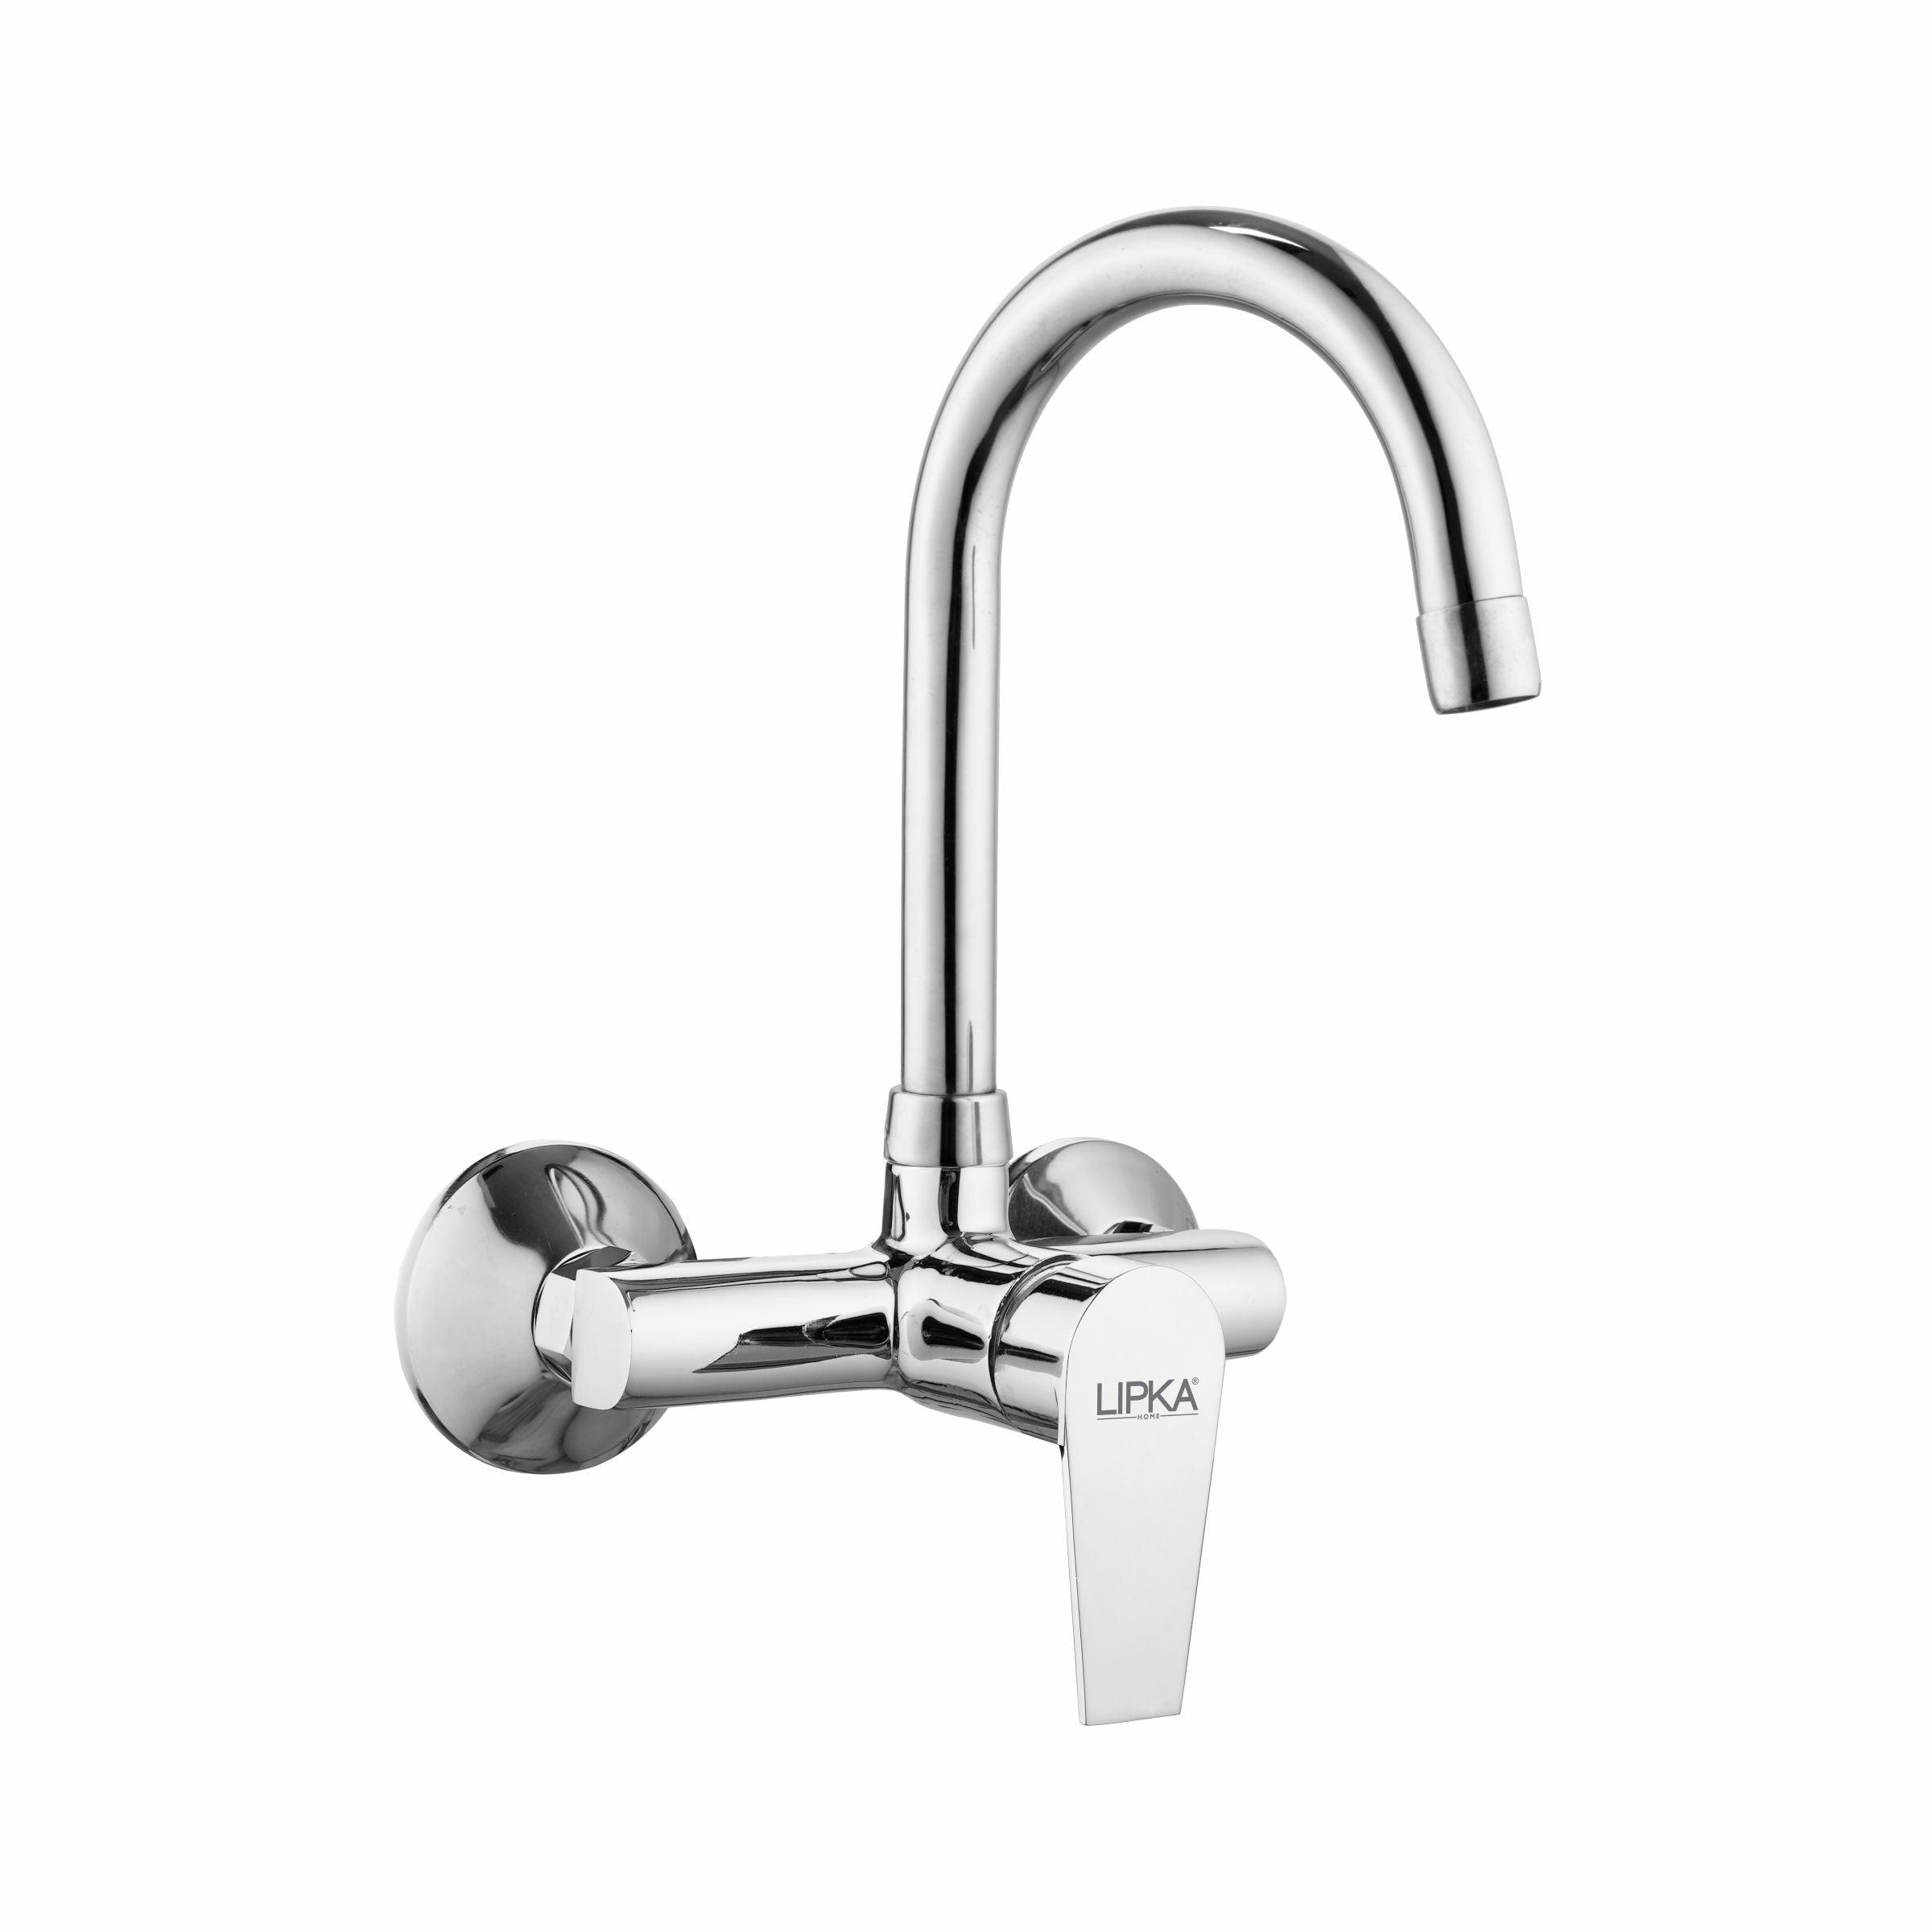 Victory Single Lever Sink Mixer with Swivel Spout (15 Inches) - LIPKA - Lipka Home